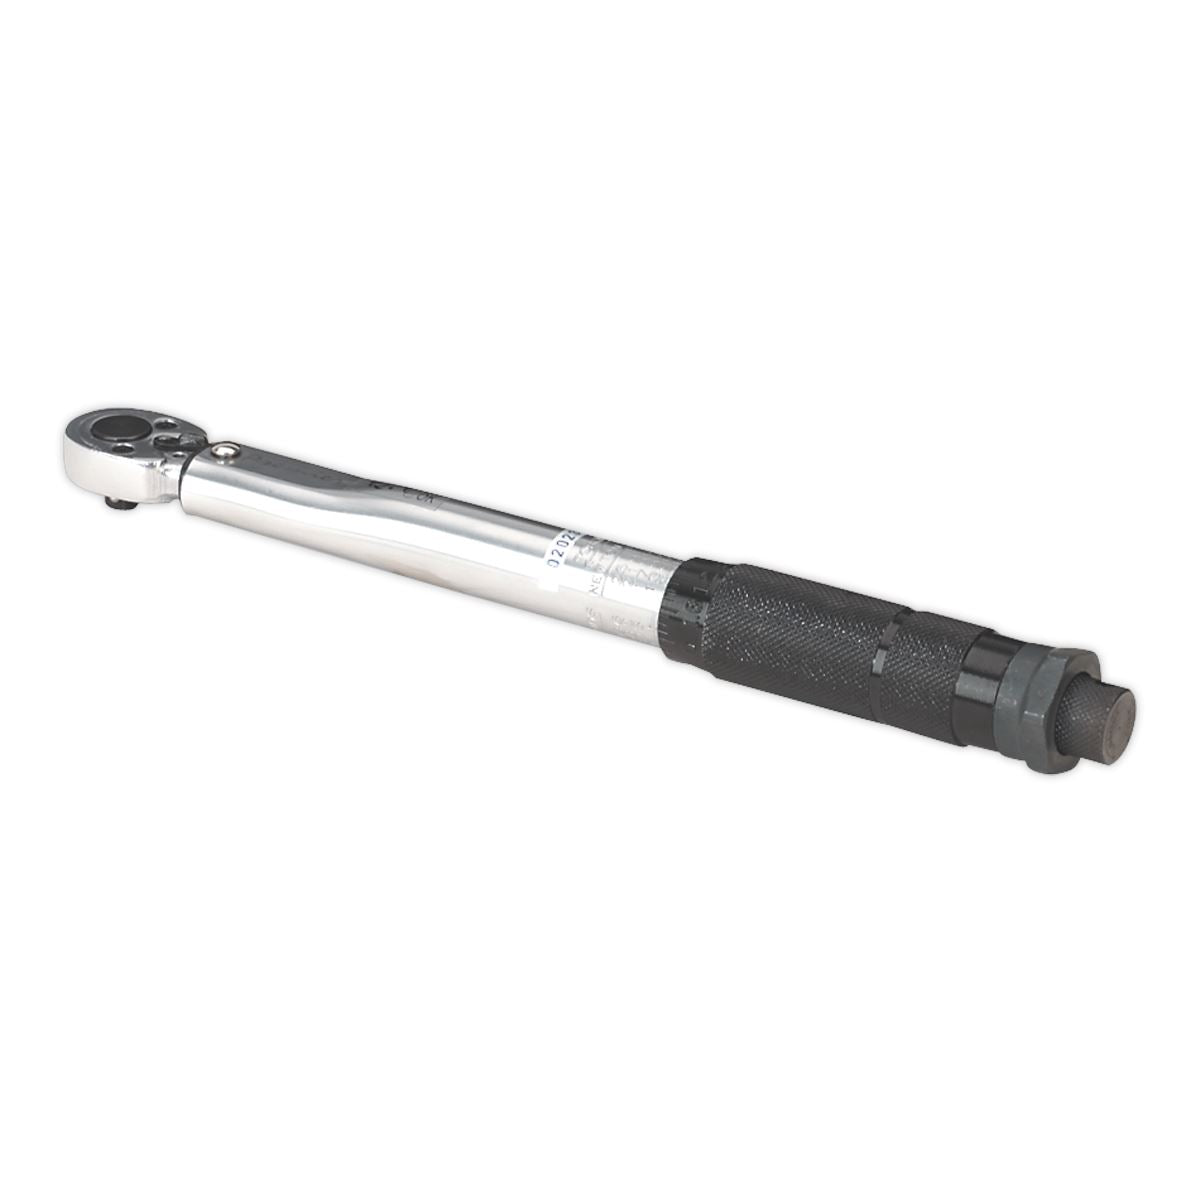 Sealey Premier Torque Wrench Micrometer Style 1/4"Sq Drive 5-25Nm(44-221lb.in) - Calibrated